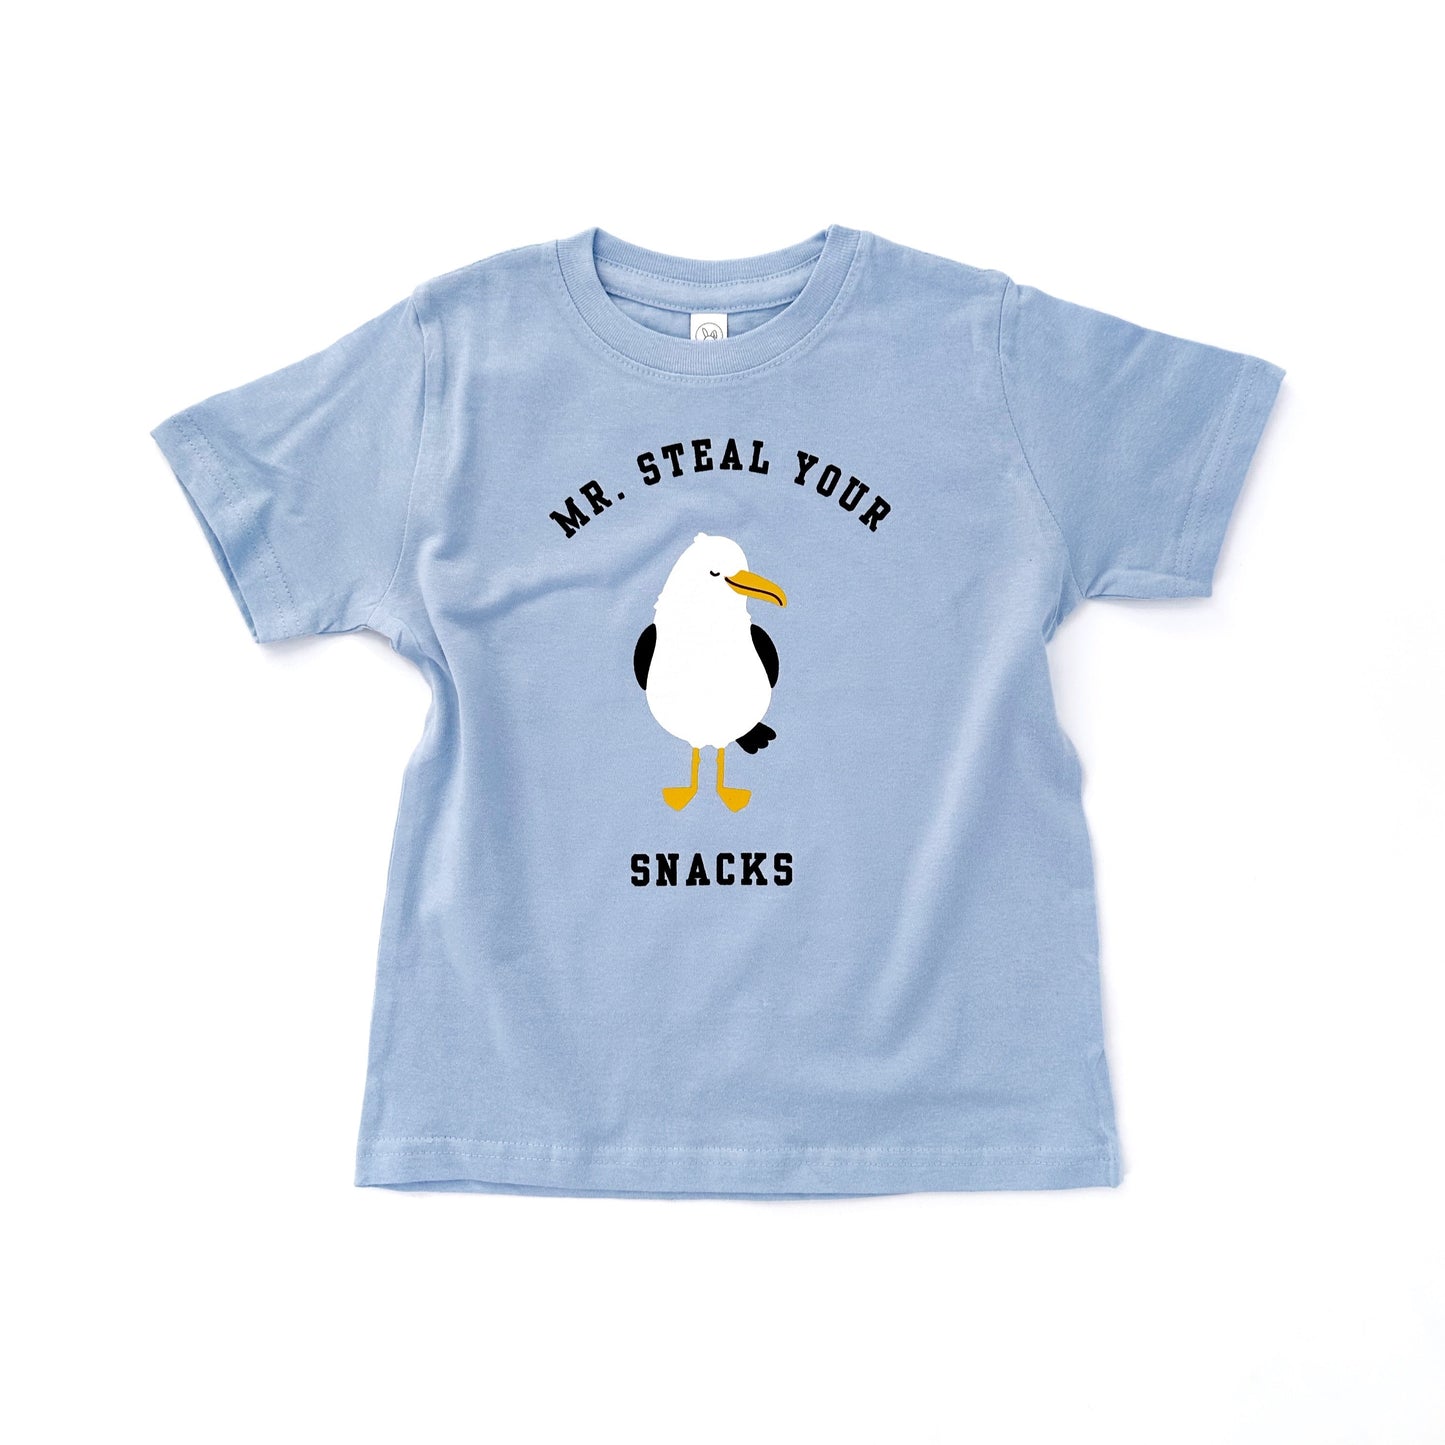 Mr Steal Your Snacks Tee